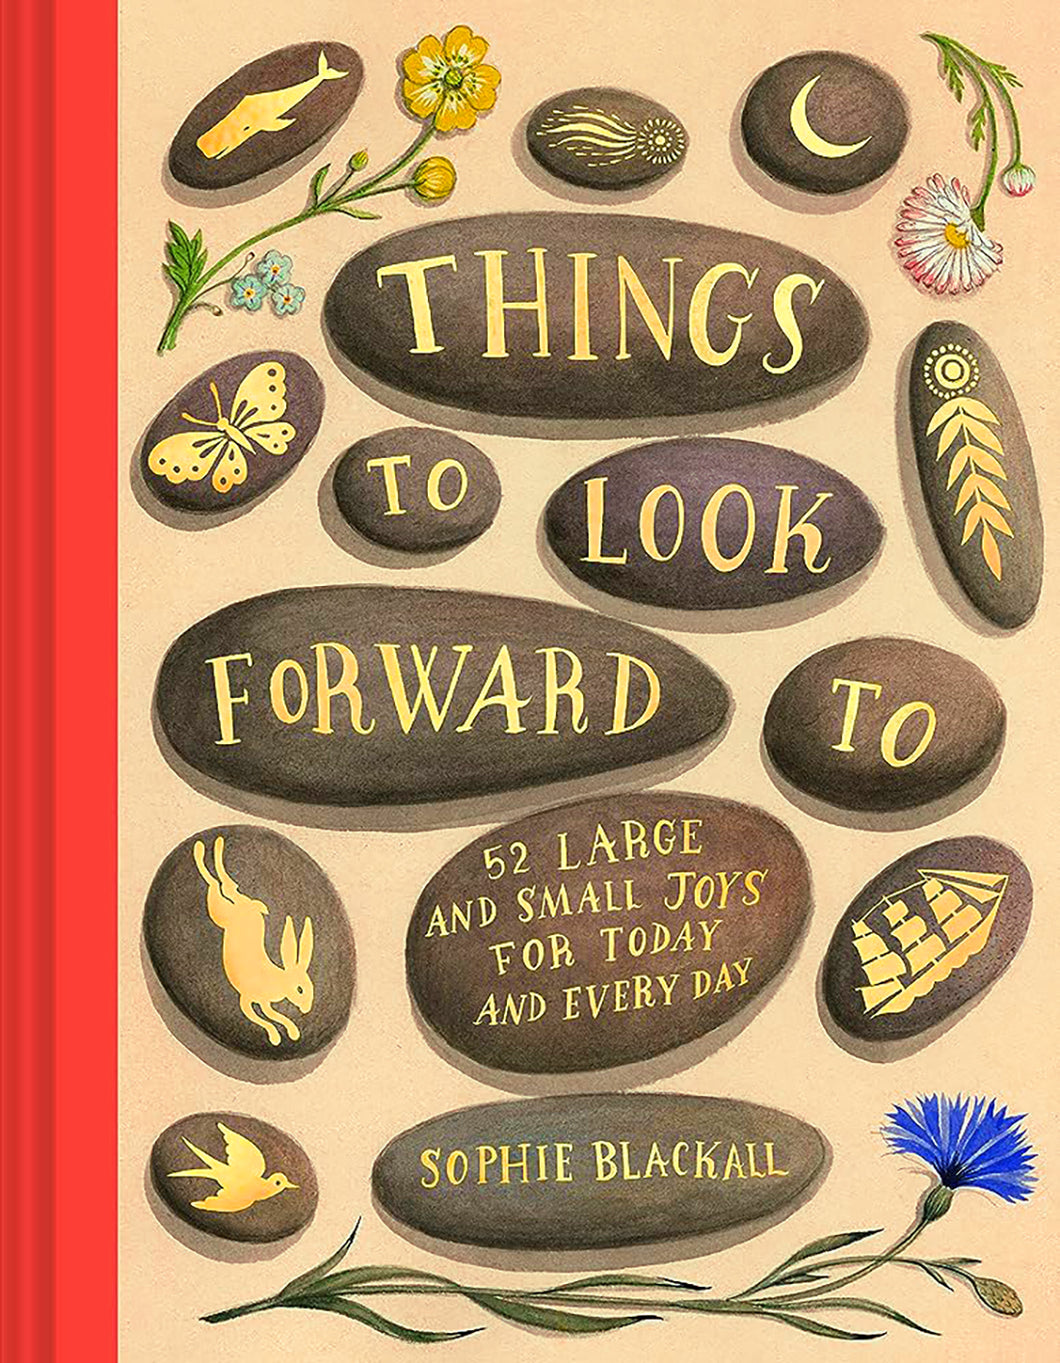 Things To Look Forward To by Sophie Blackall / BOOK OR BUNDLE - Starting at $23!